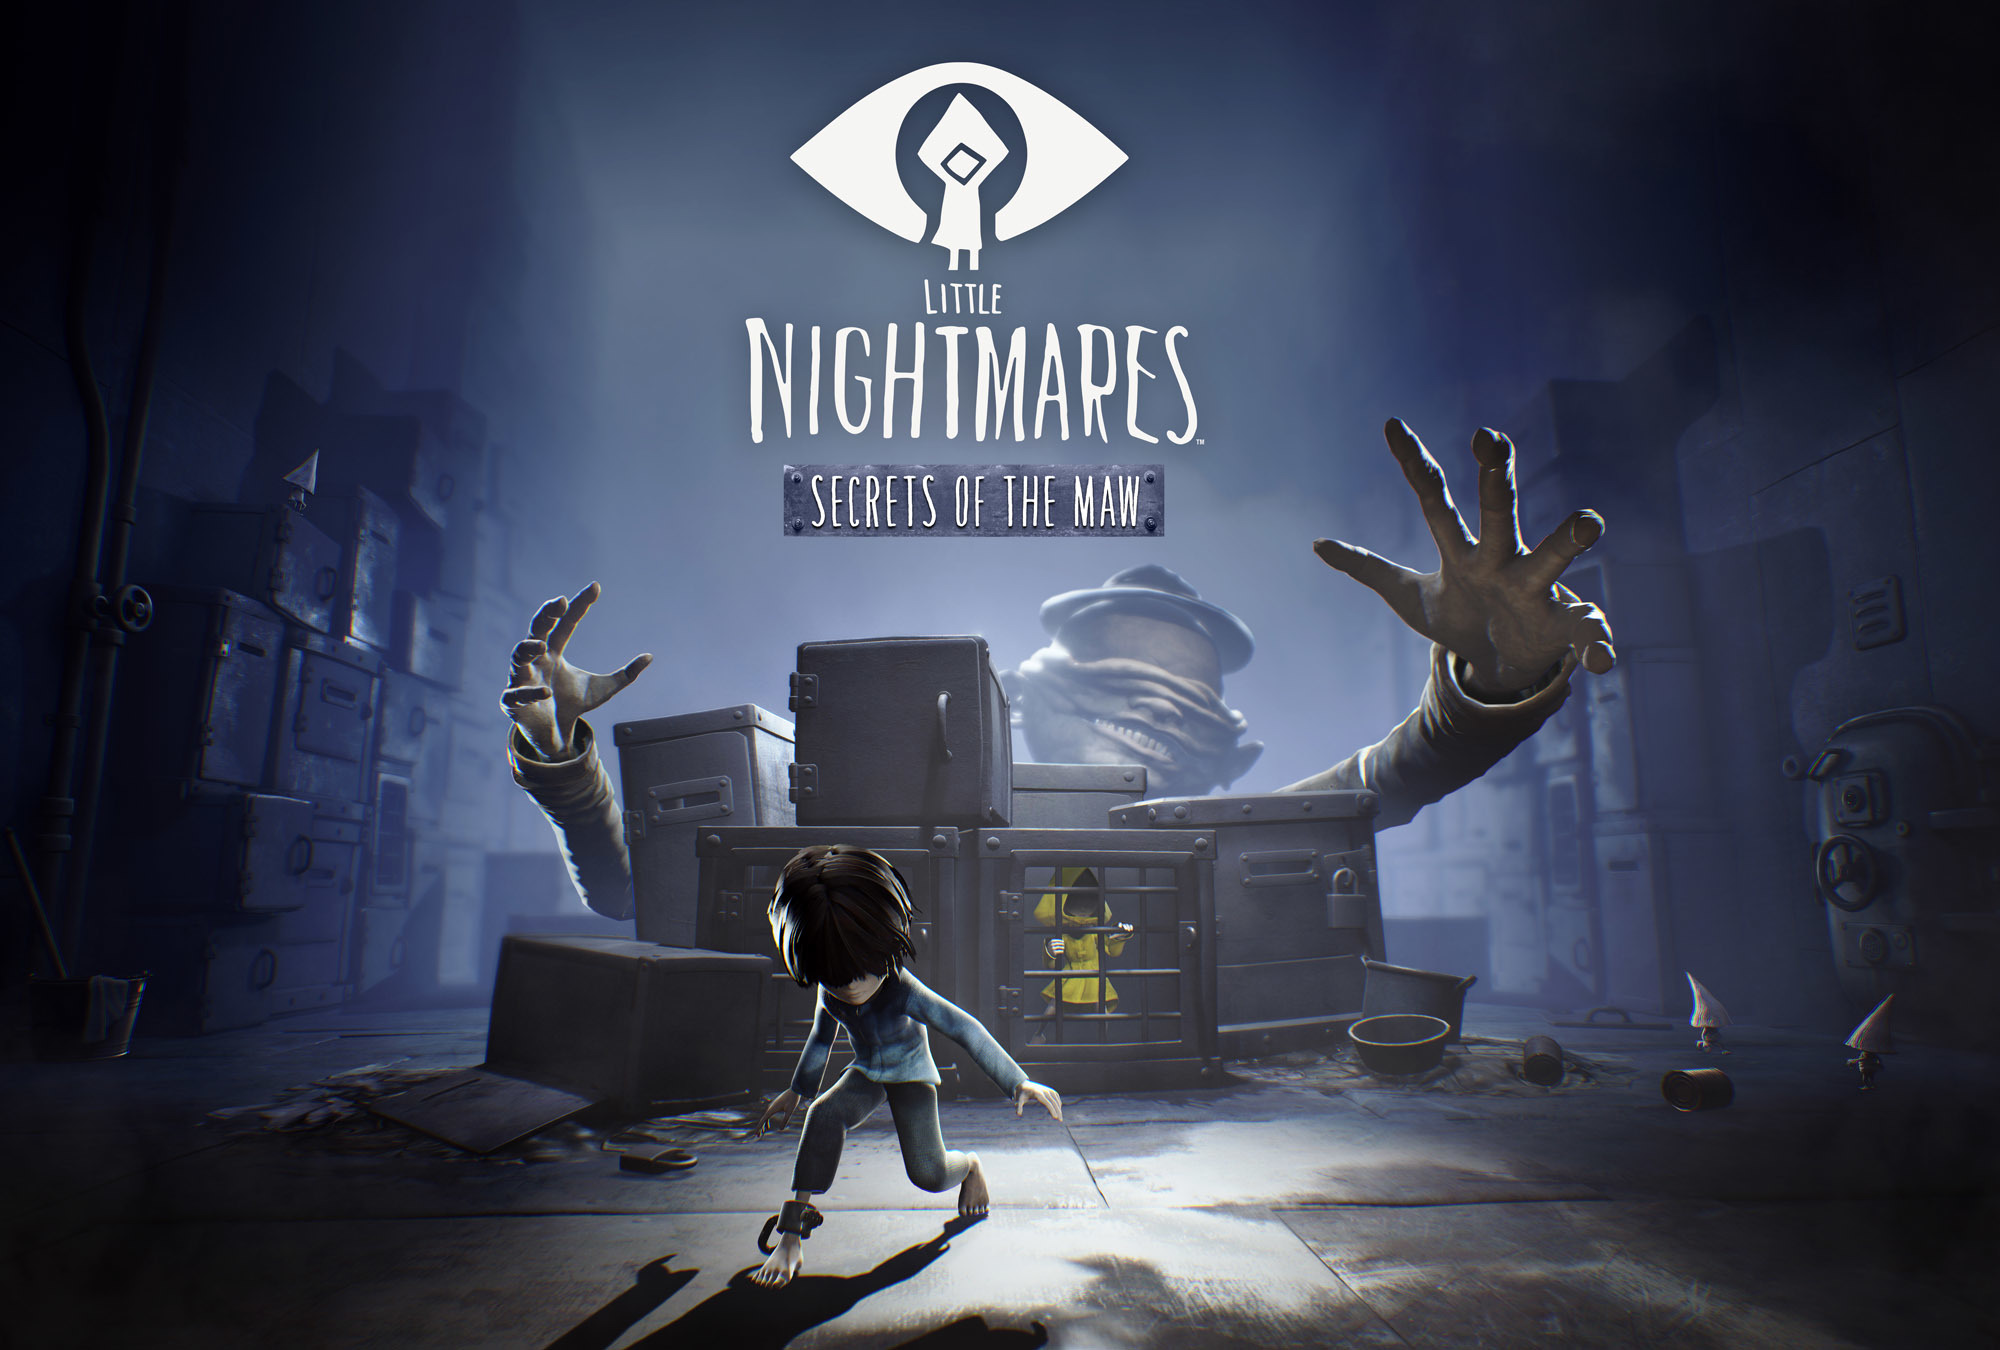 Little Nightmares: in arrivo l’espansione “Secrets of The Maw”